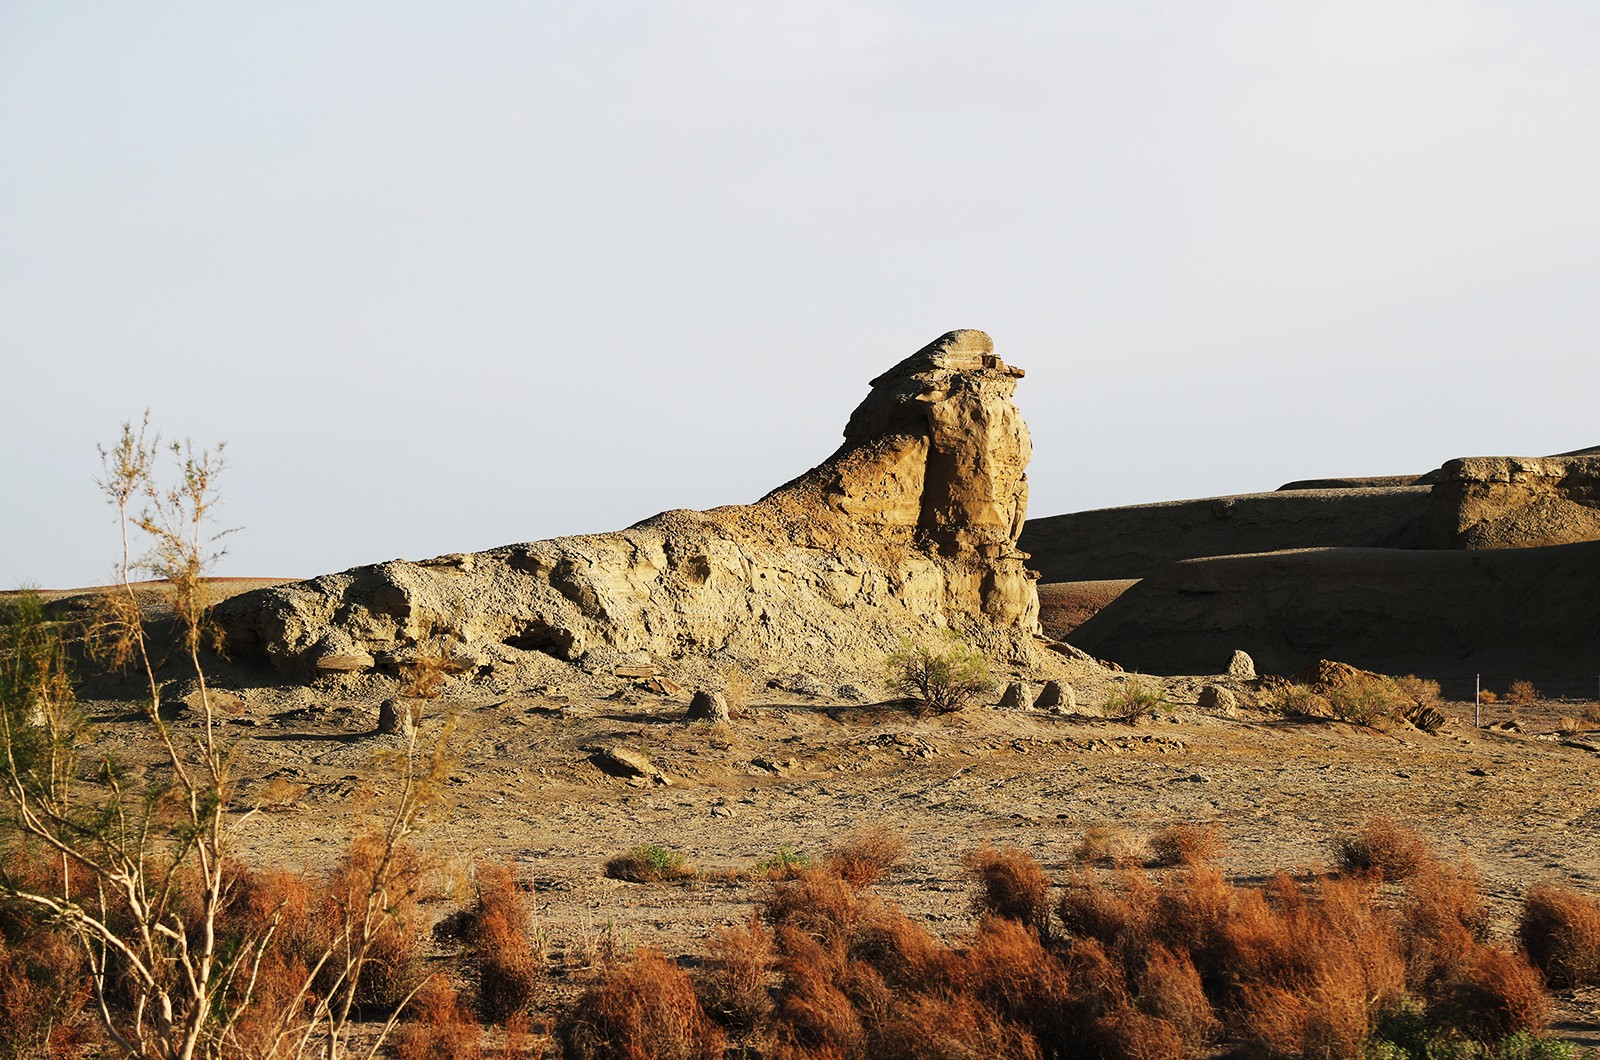 A wind-eroded rock forms the shape of a lion at the 